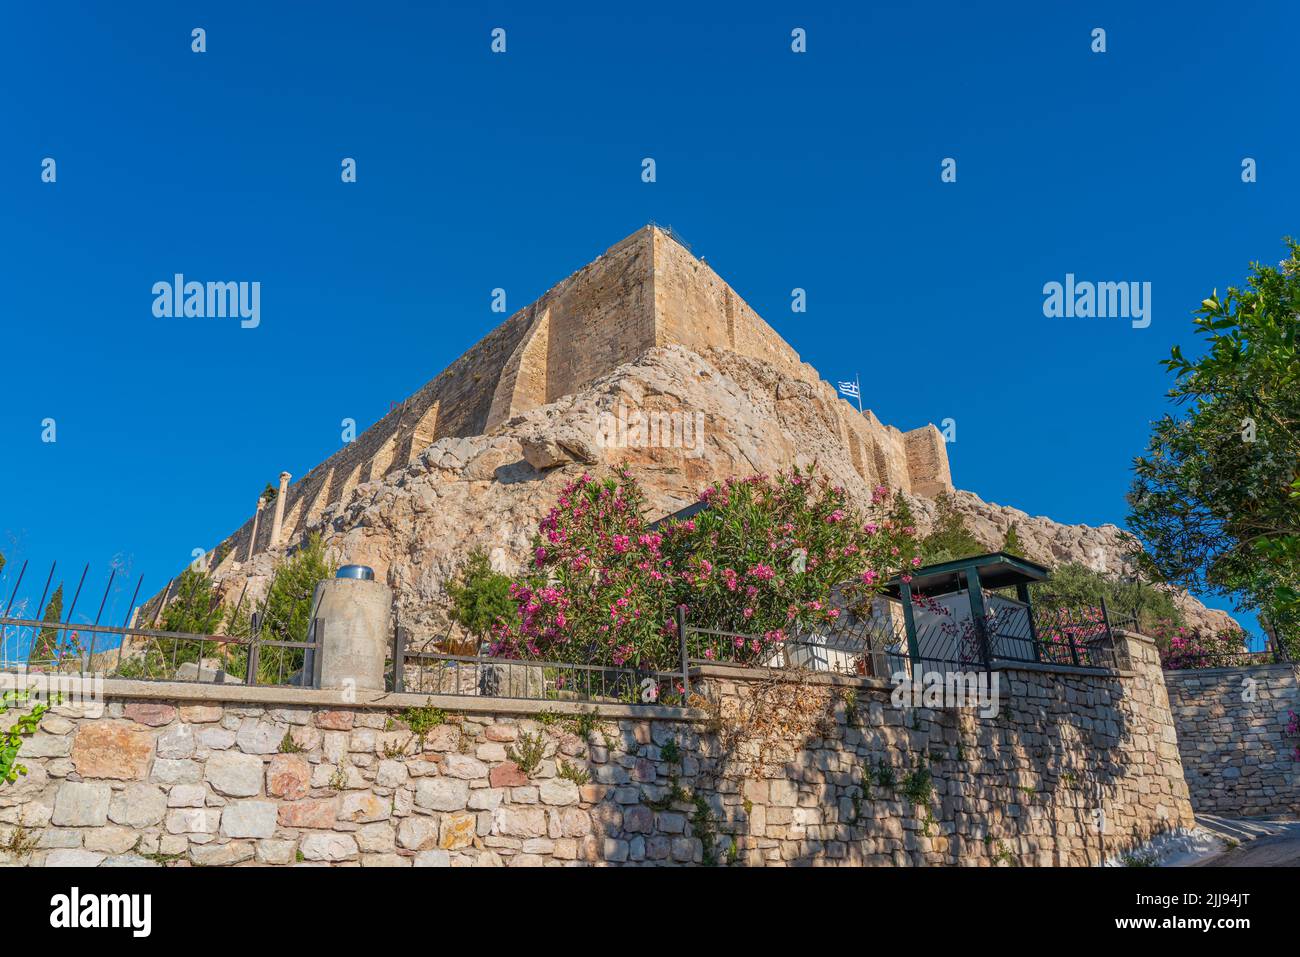 Famous Athens landmark Acropolis from the south side of the fortress, Greece Stock Photo